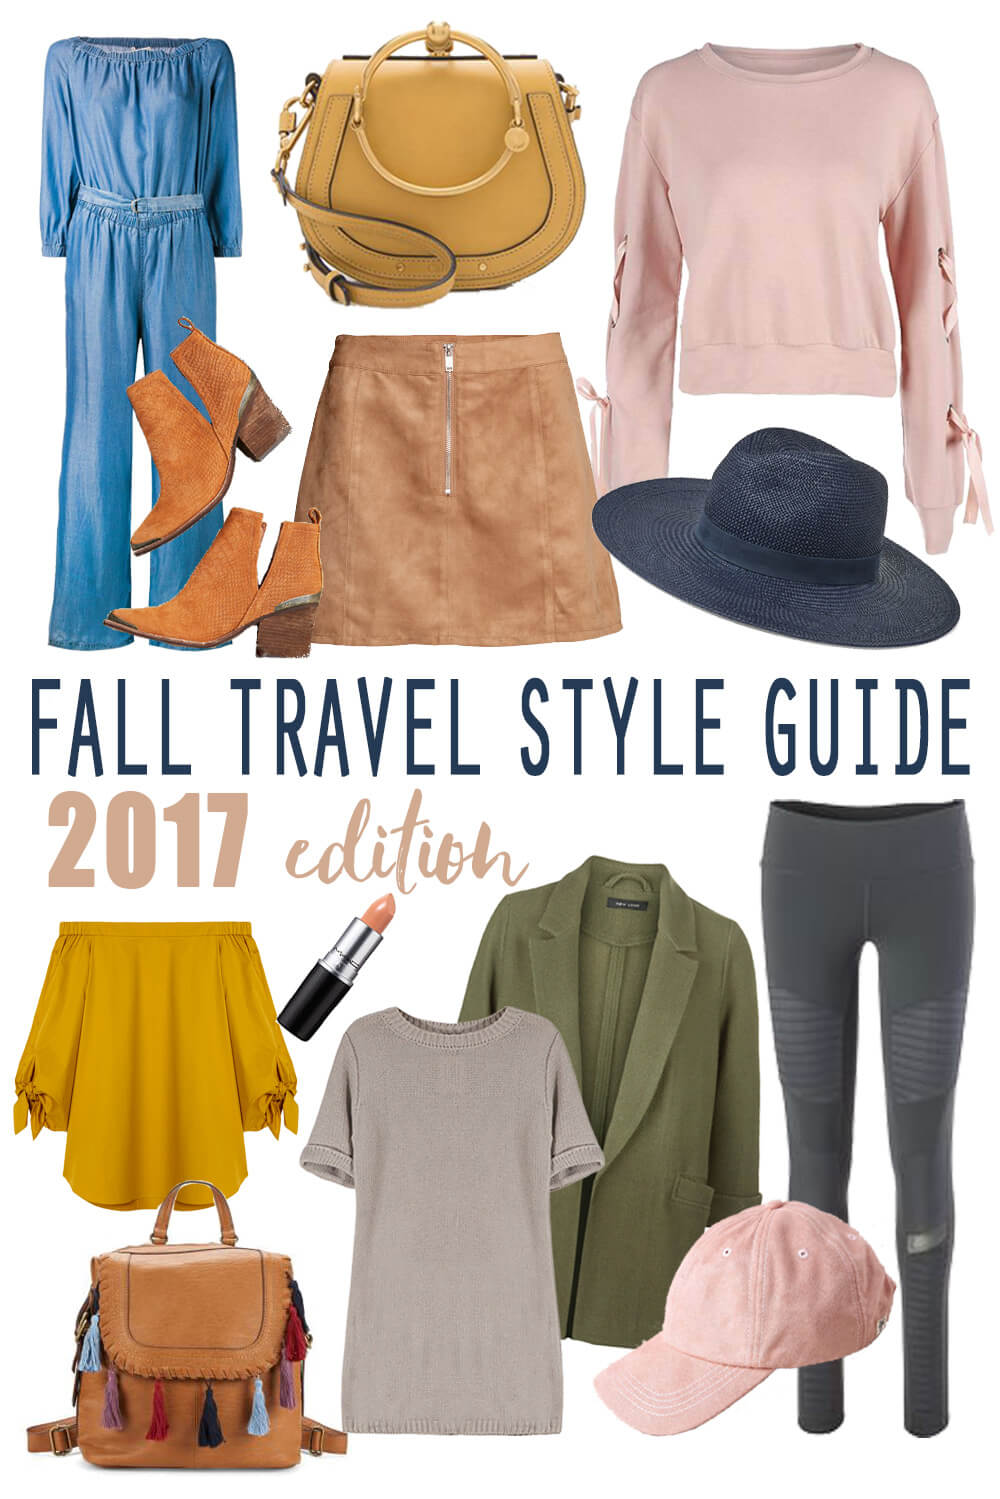 2017 Fall Travel Style Guide